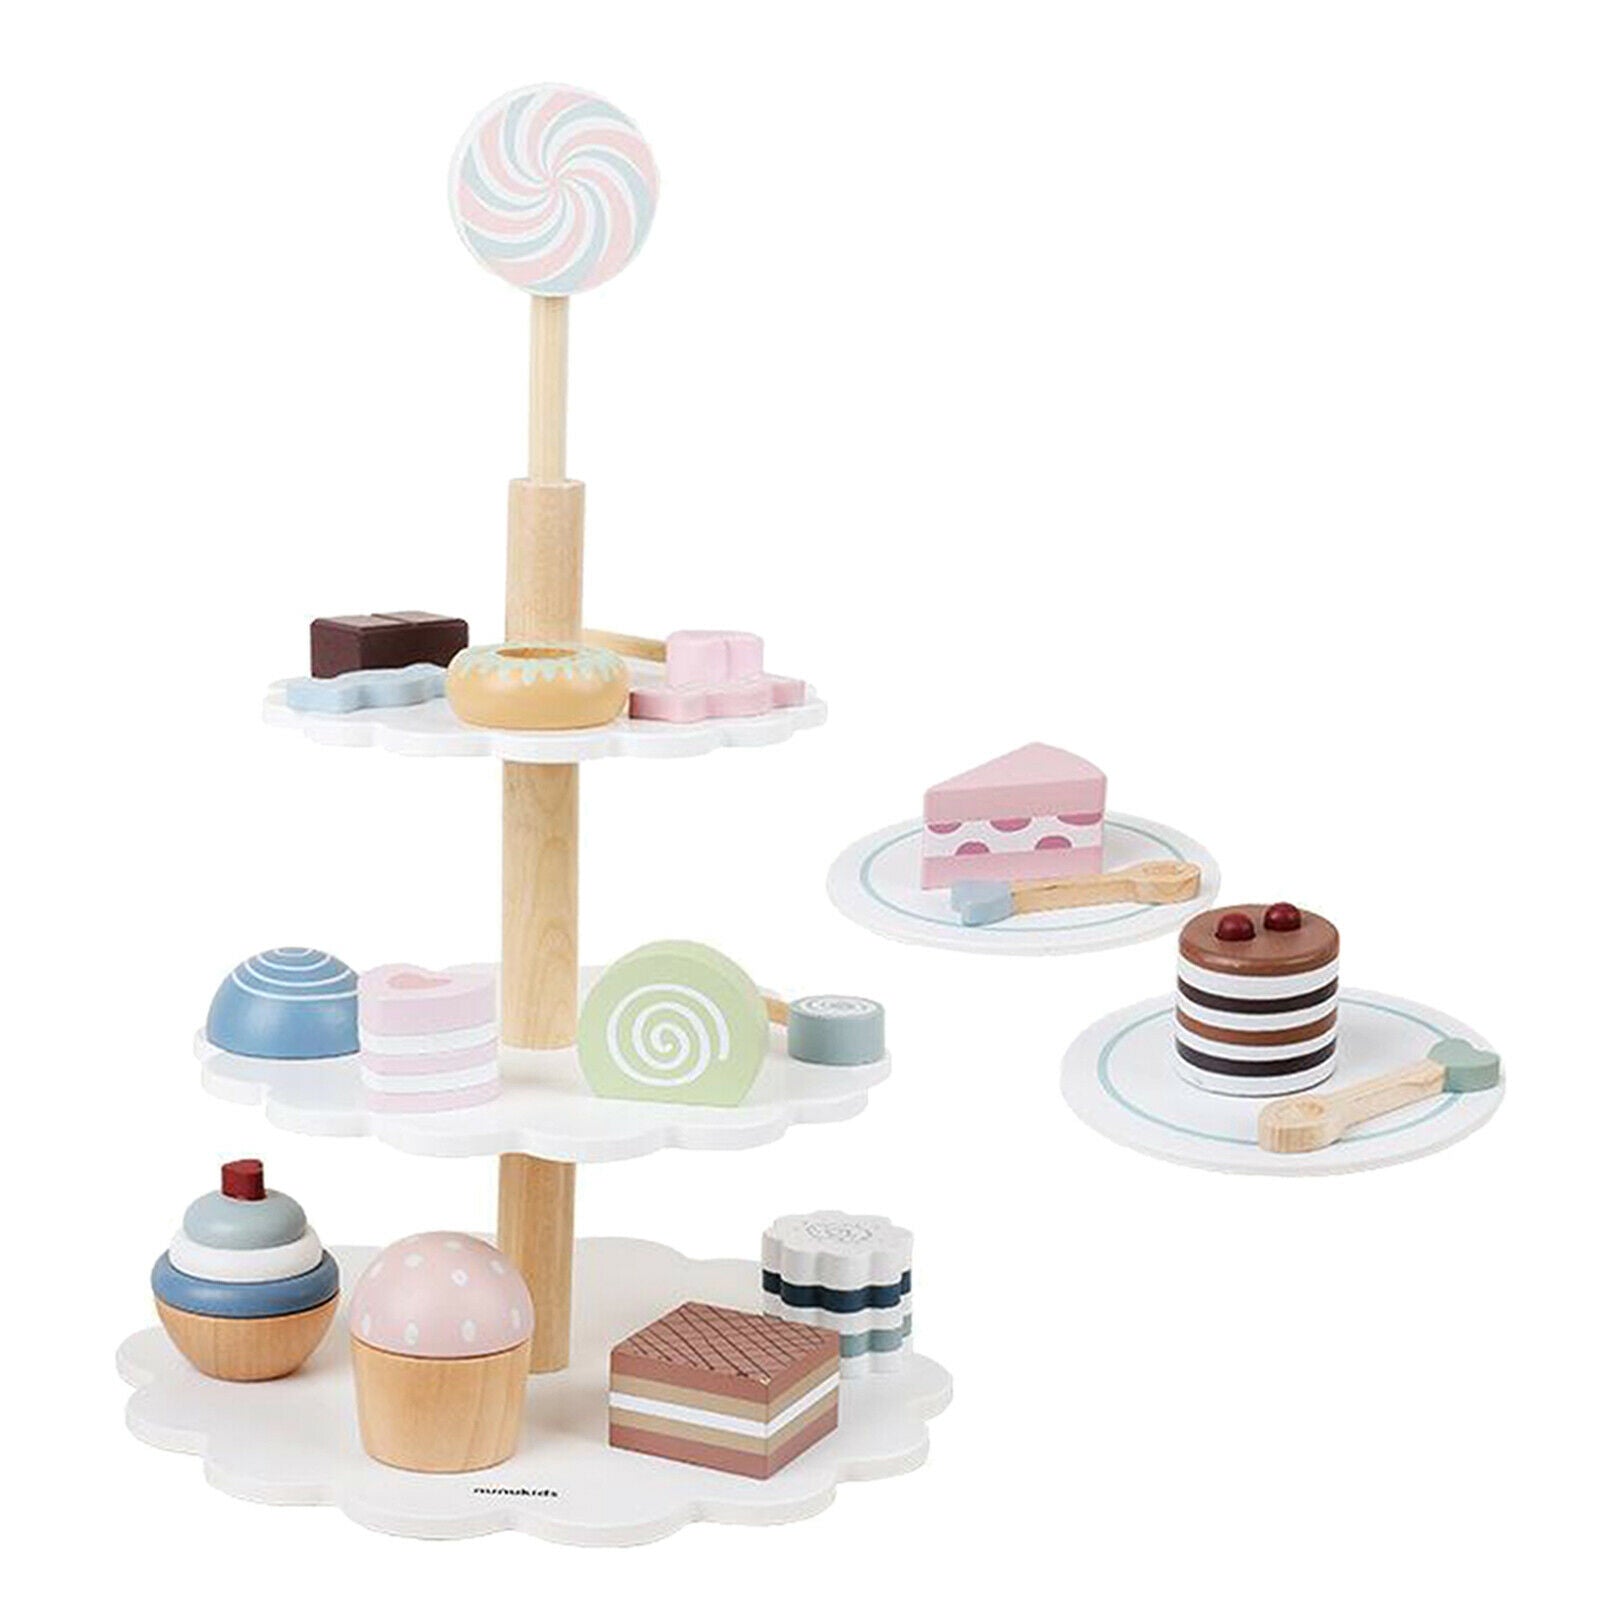 21 PCS Pretend Play Food Set Pretend Play Desserts Cake and Donuts Food Toys -